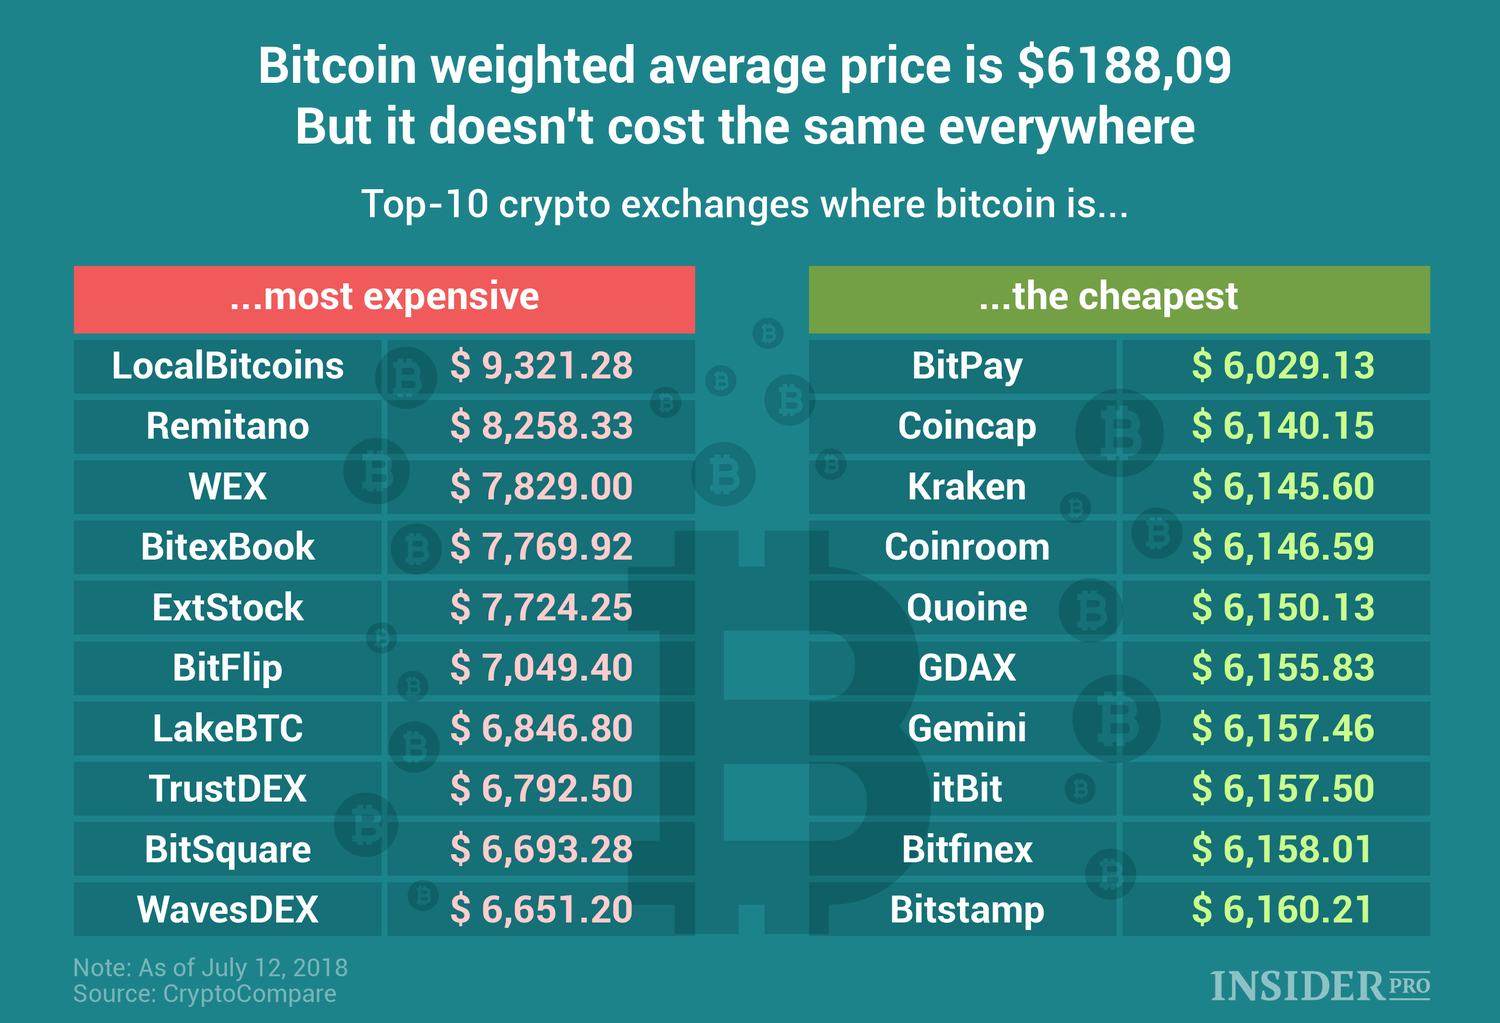 Why is the Price of Bitcoin Different Around the World?